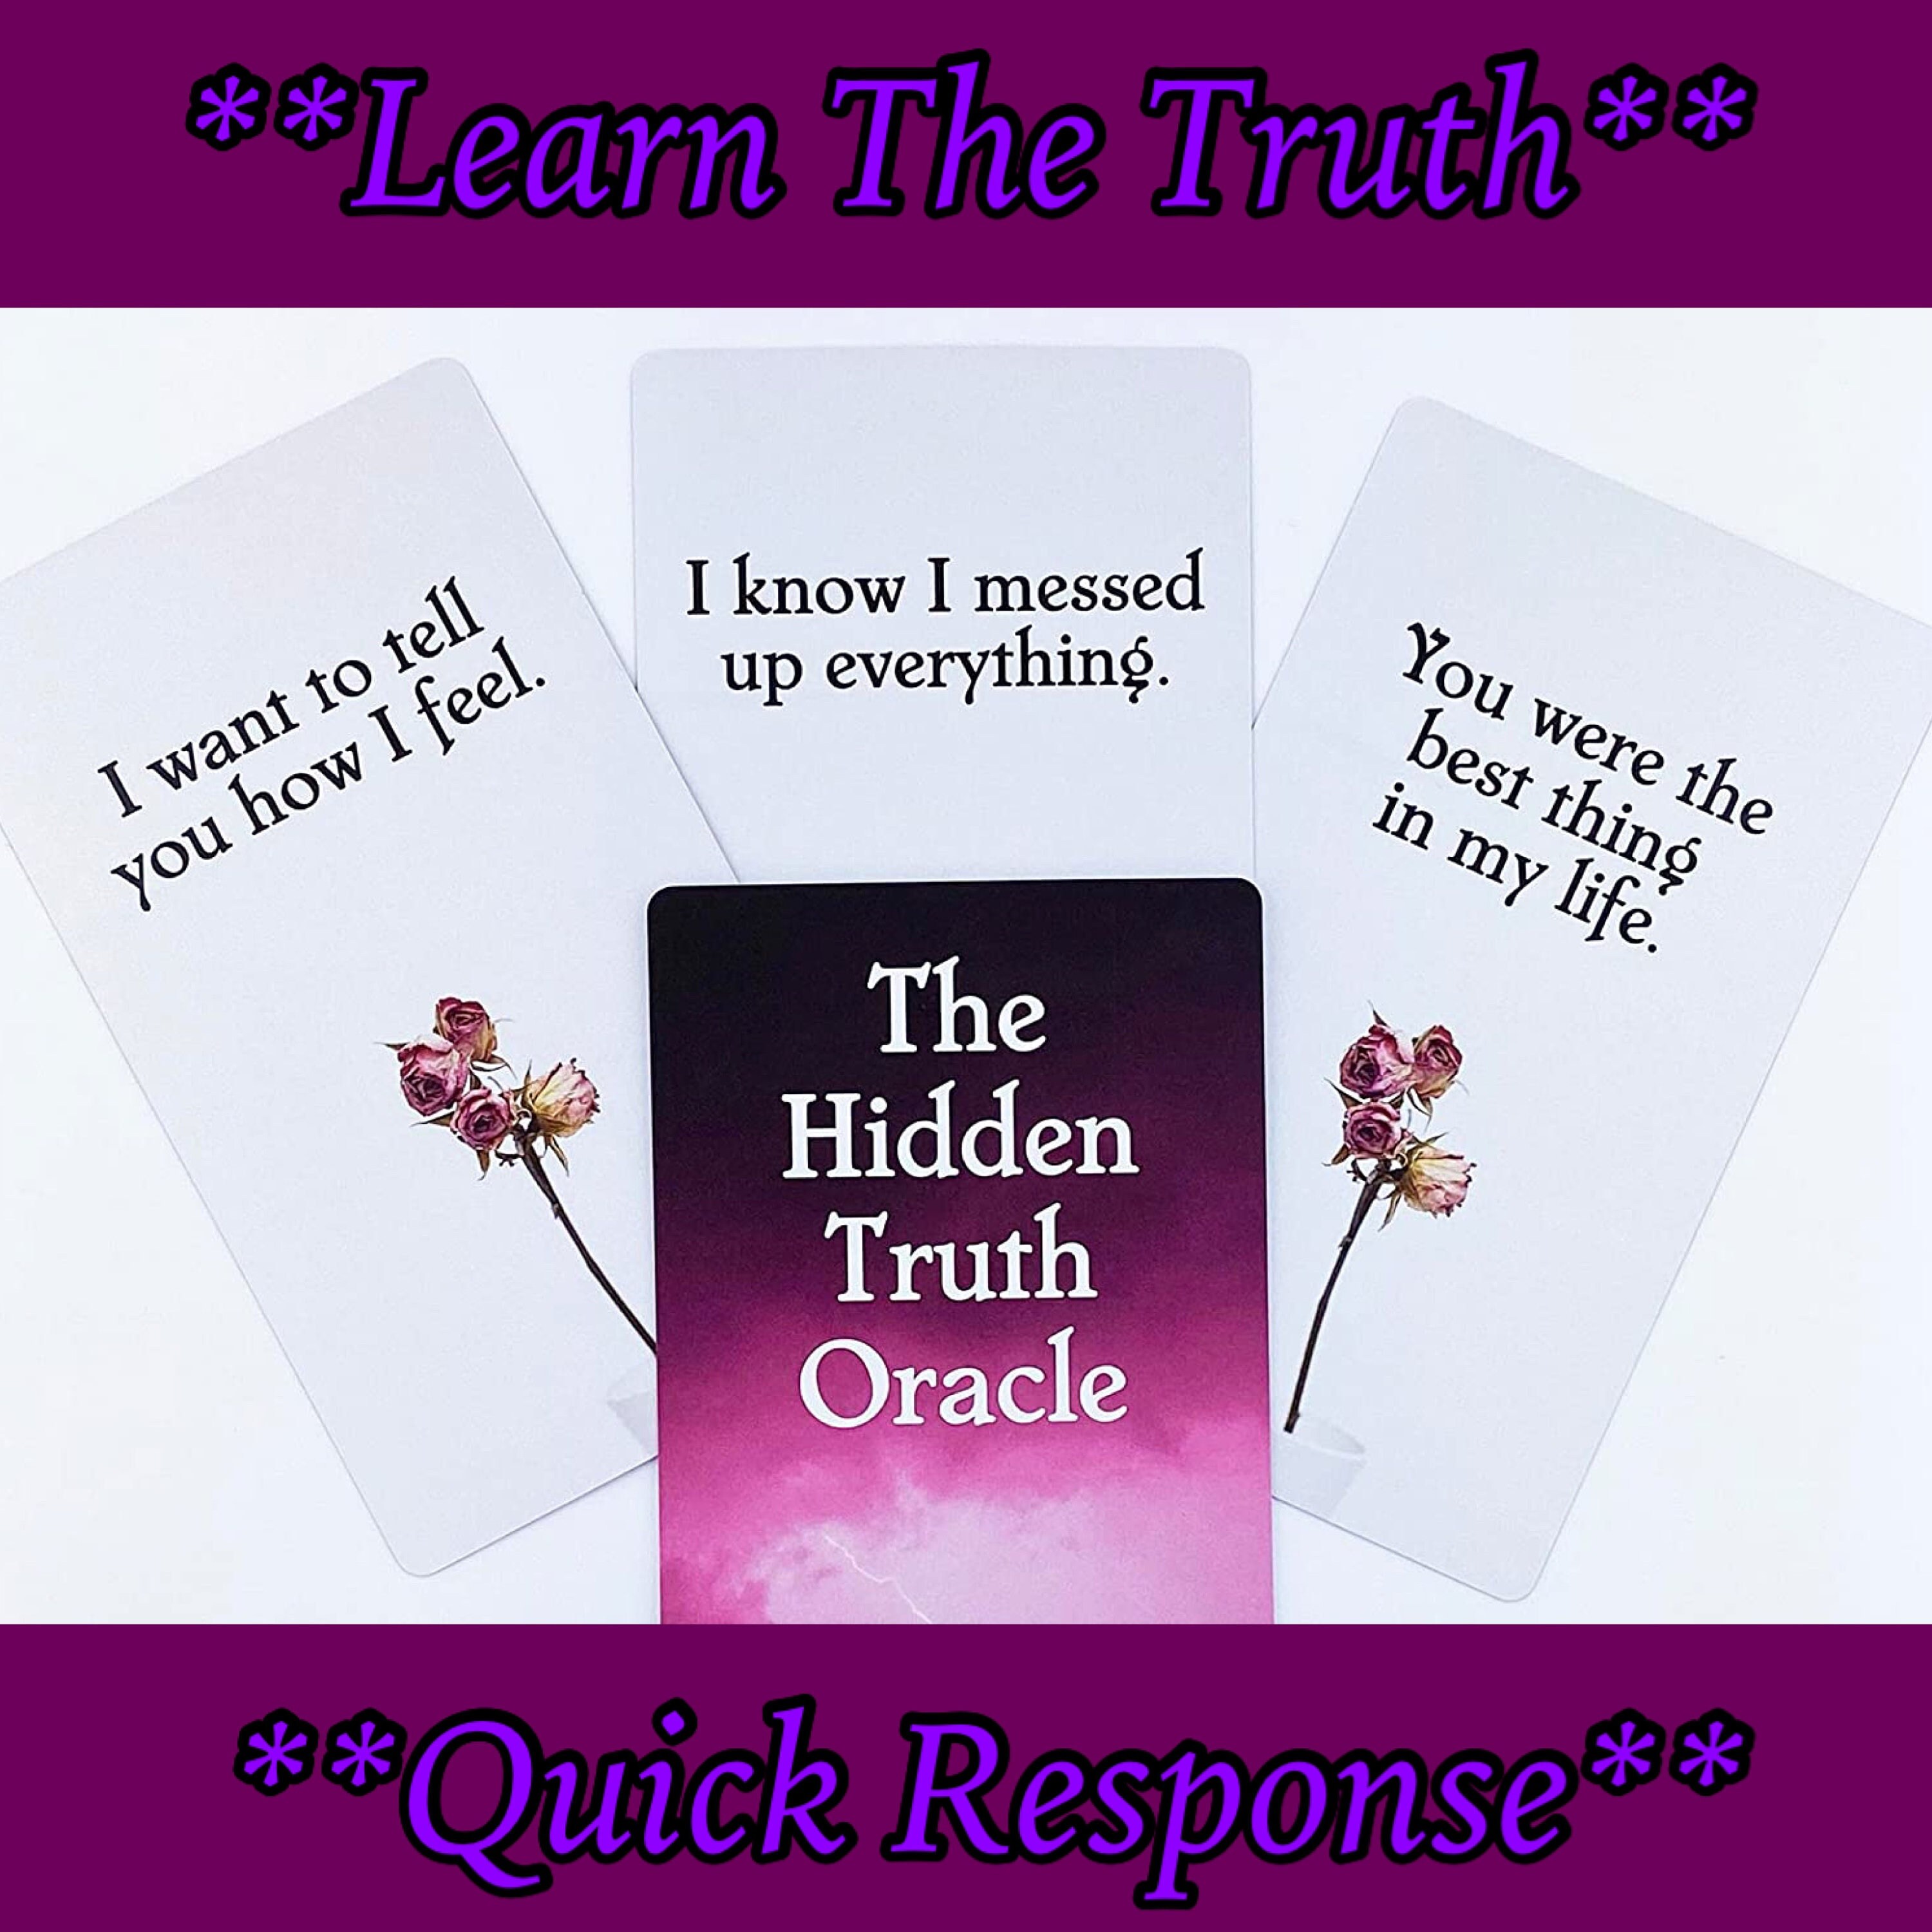 sejle tro på Bangladesh The Hidden Truth Oracle Reading L Messages From Him/her L - Etsy